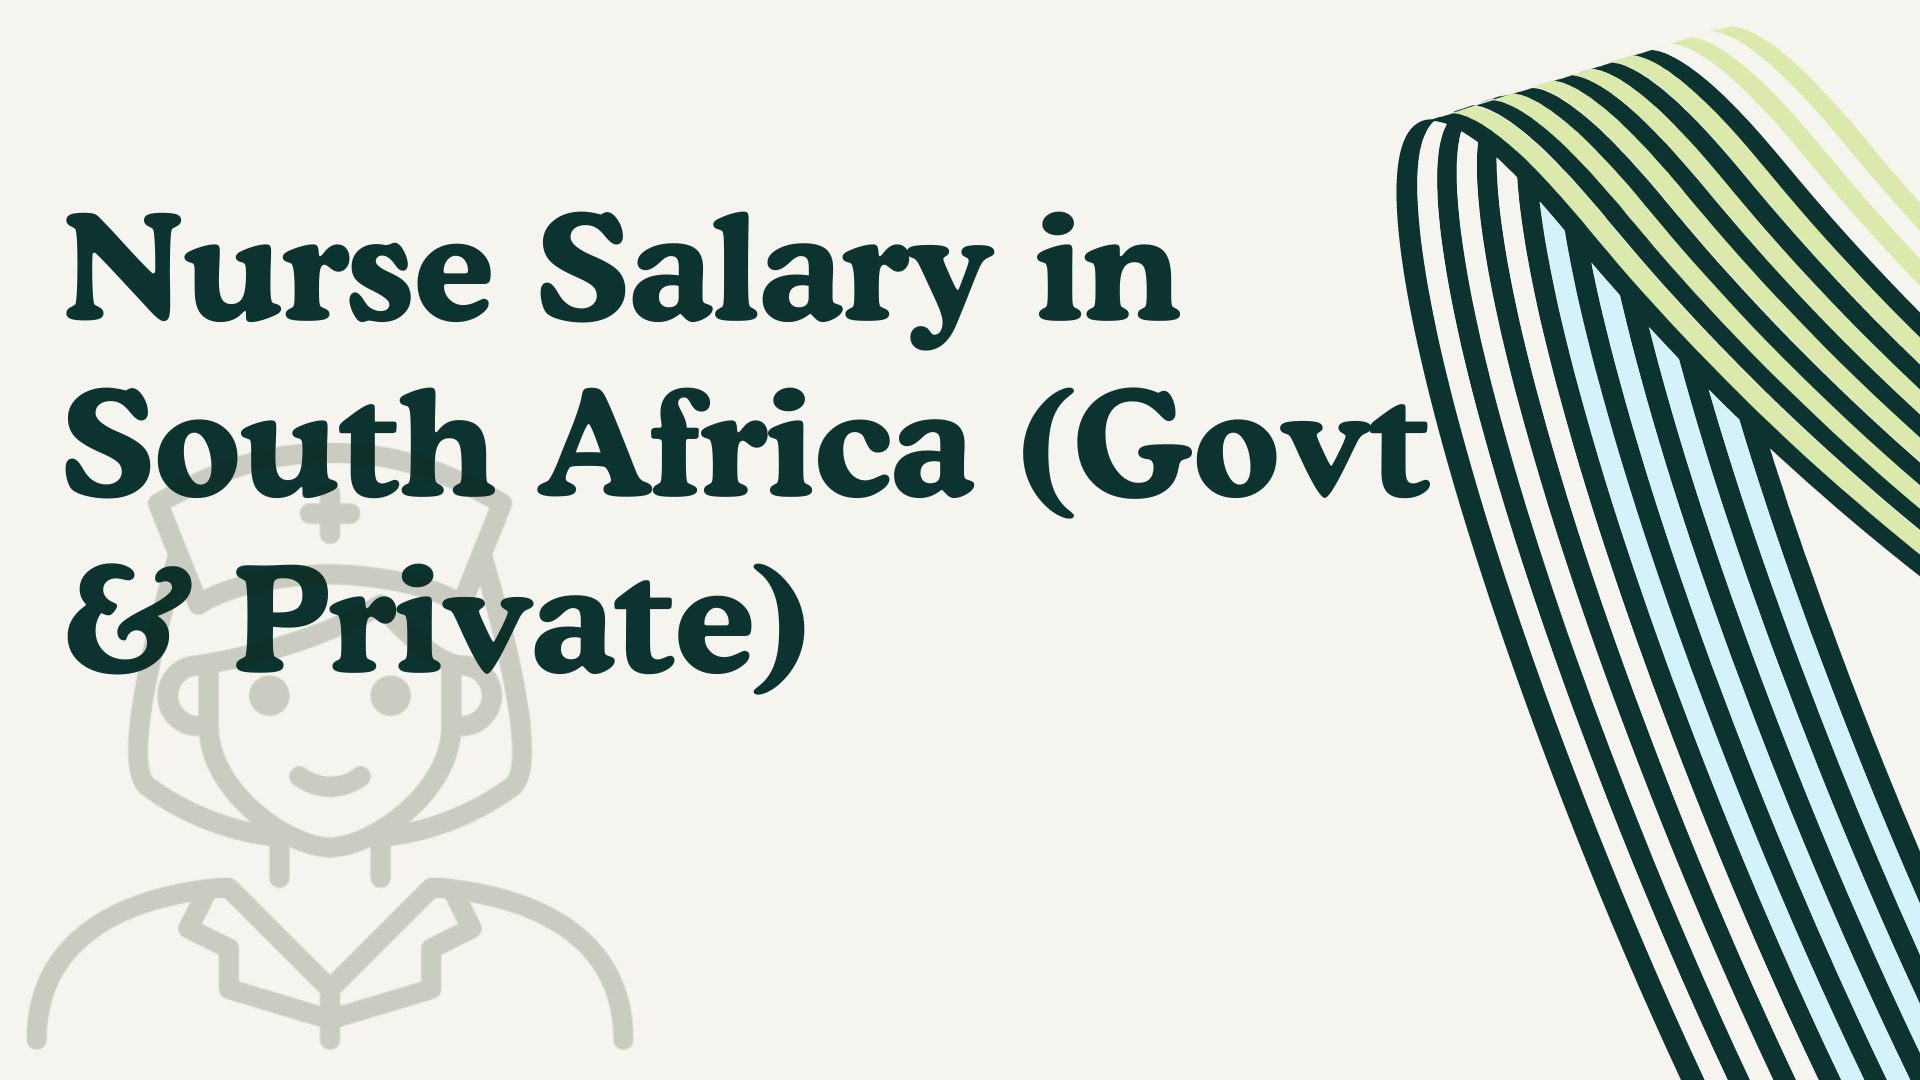 Nurse Salary in South Africa (Govt _ Private)